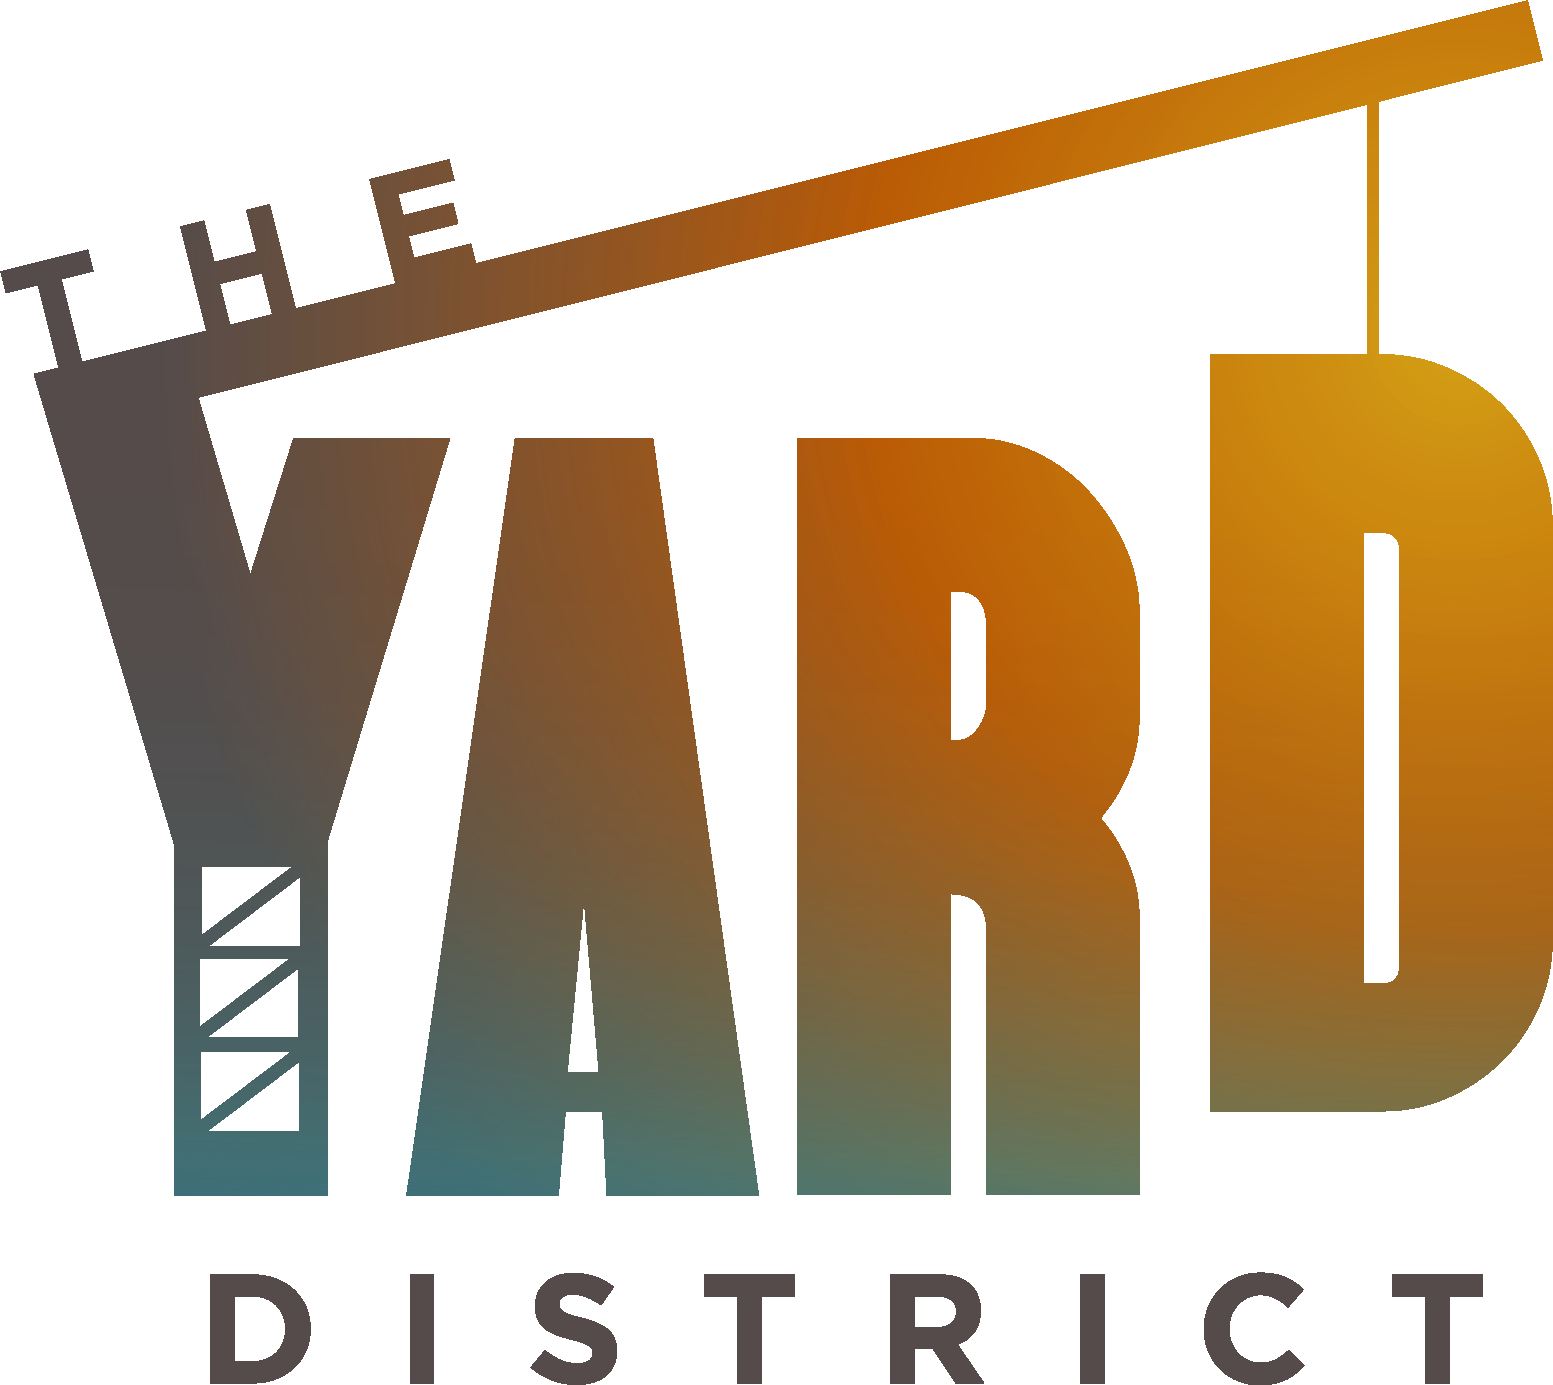 The Yard District sign